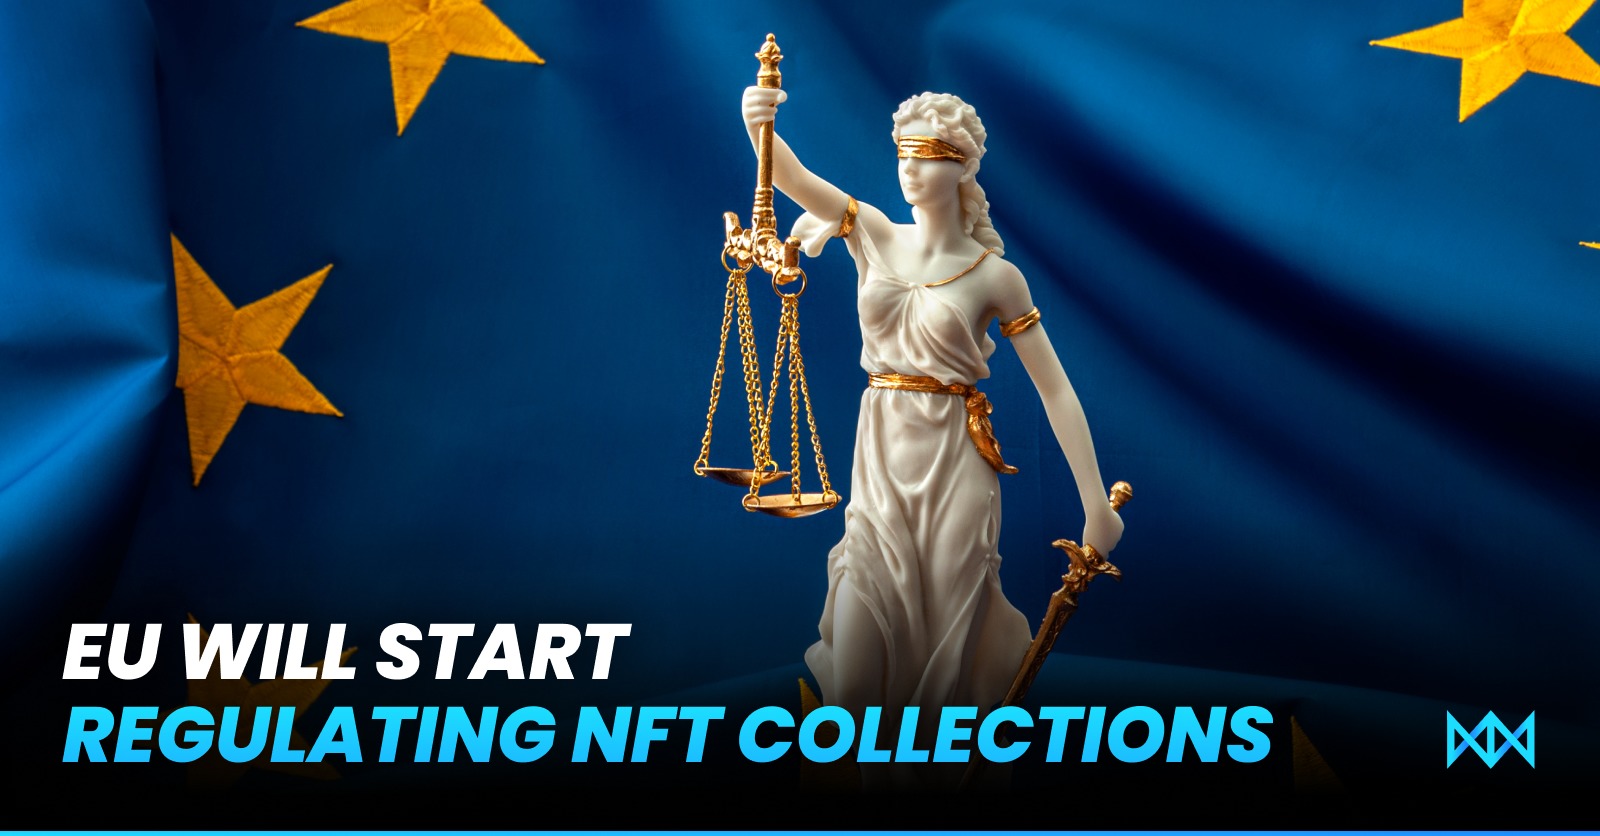 New EU Law Will Regulate NFT Collections Like Cryptocurrencies